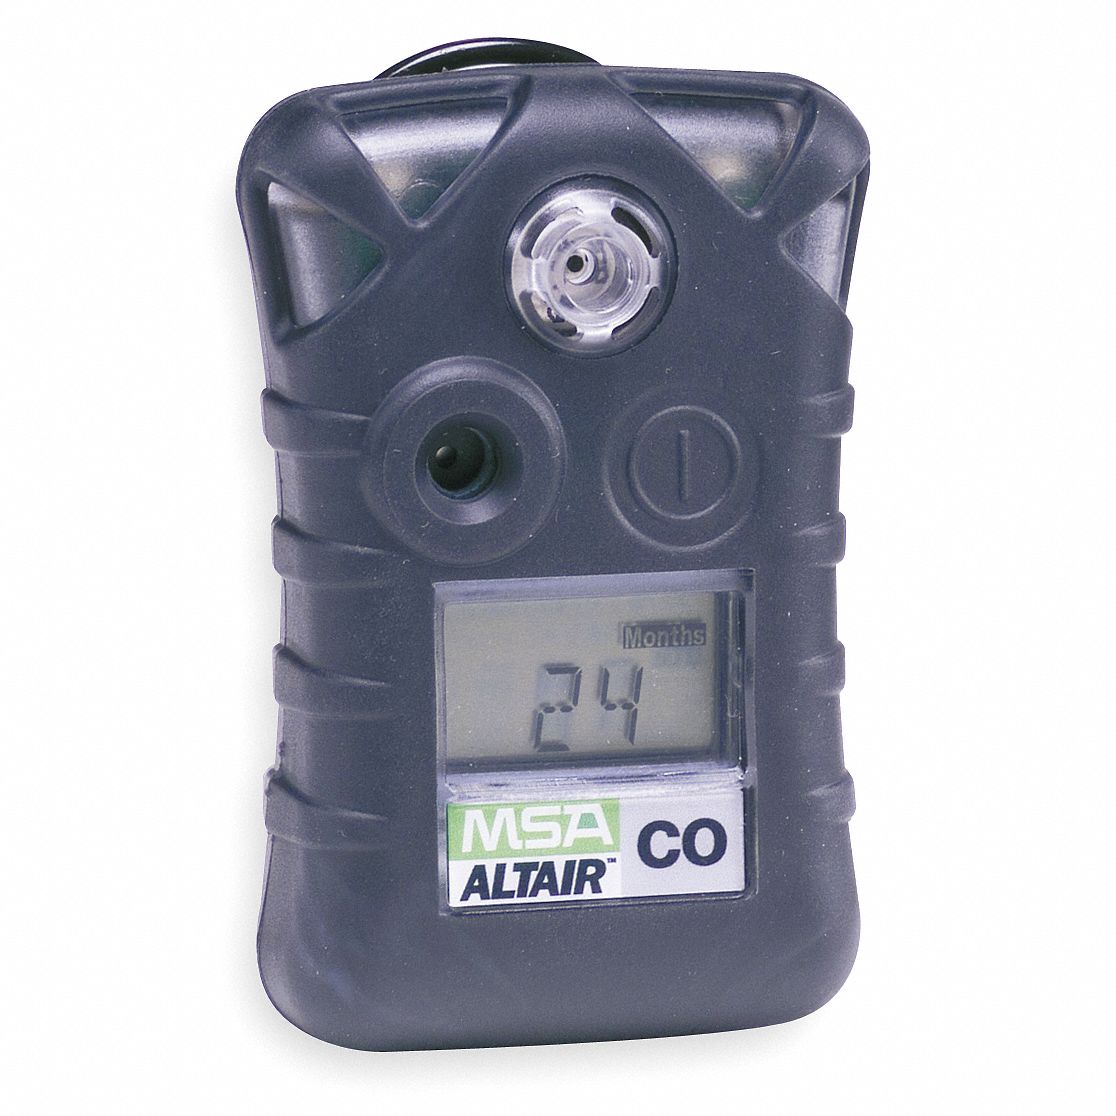 Gas Monitors and Gas Detection